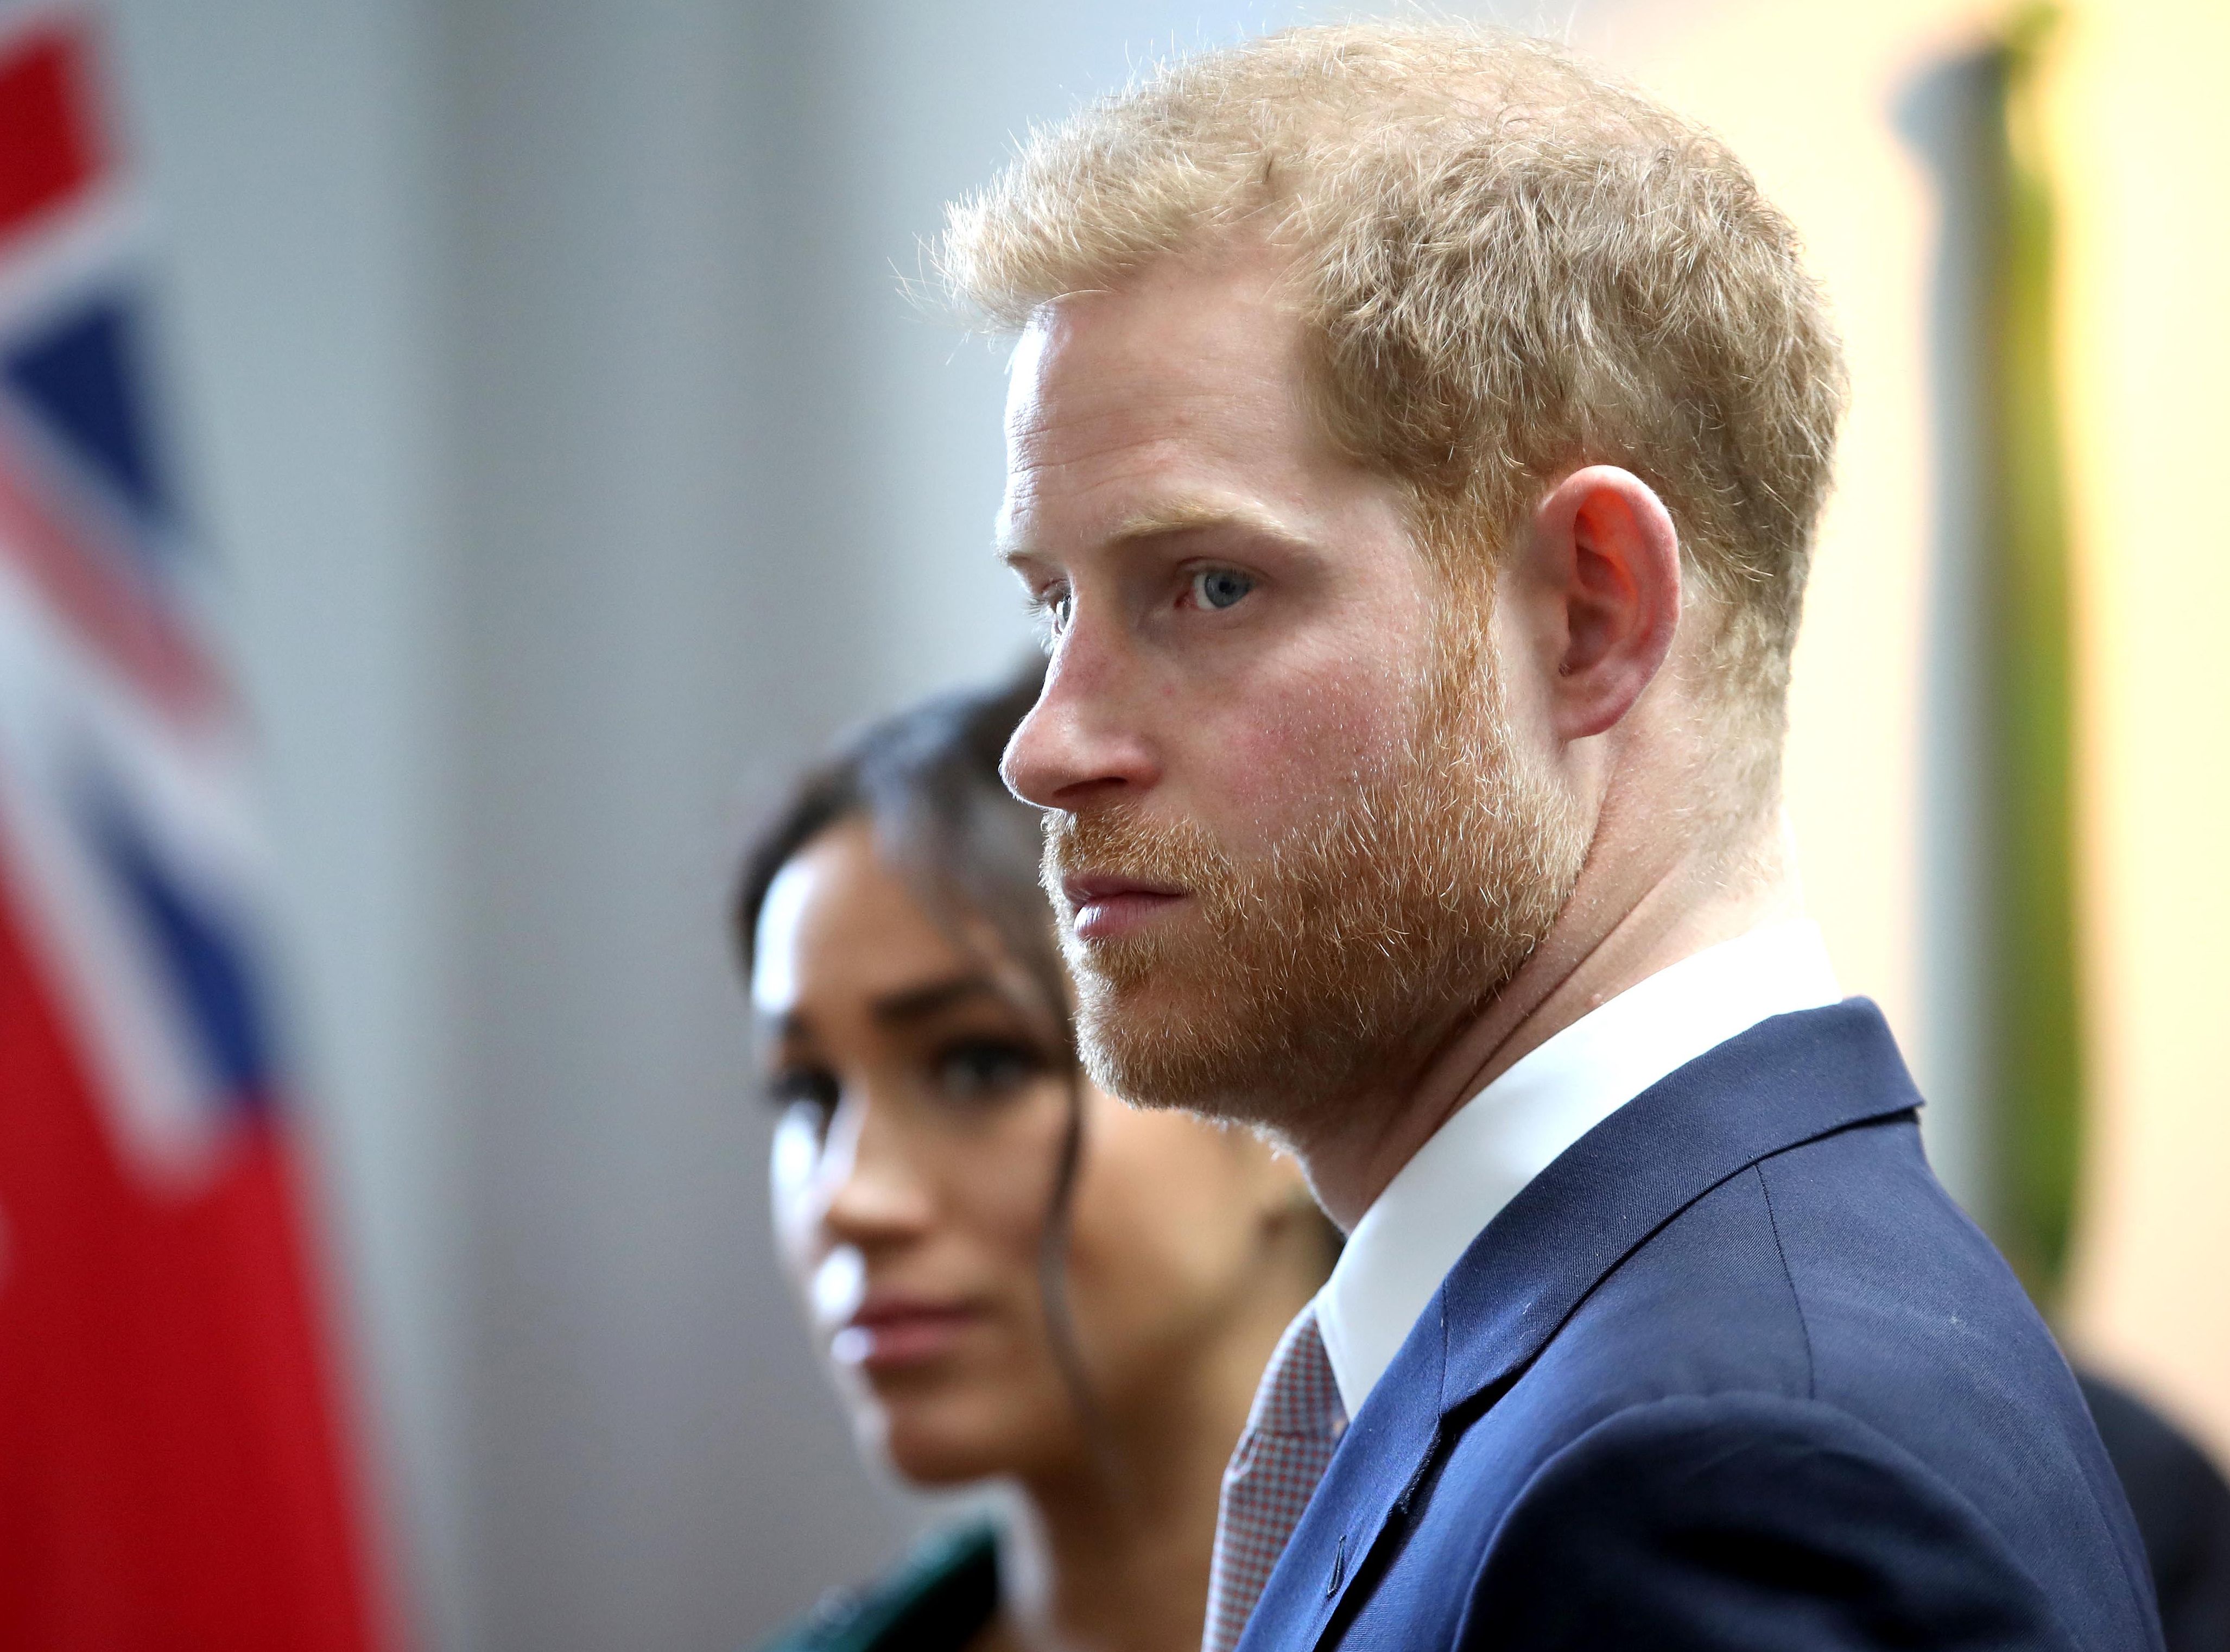 Closeup of Prince Harry's profile with Meghan Markle in the background